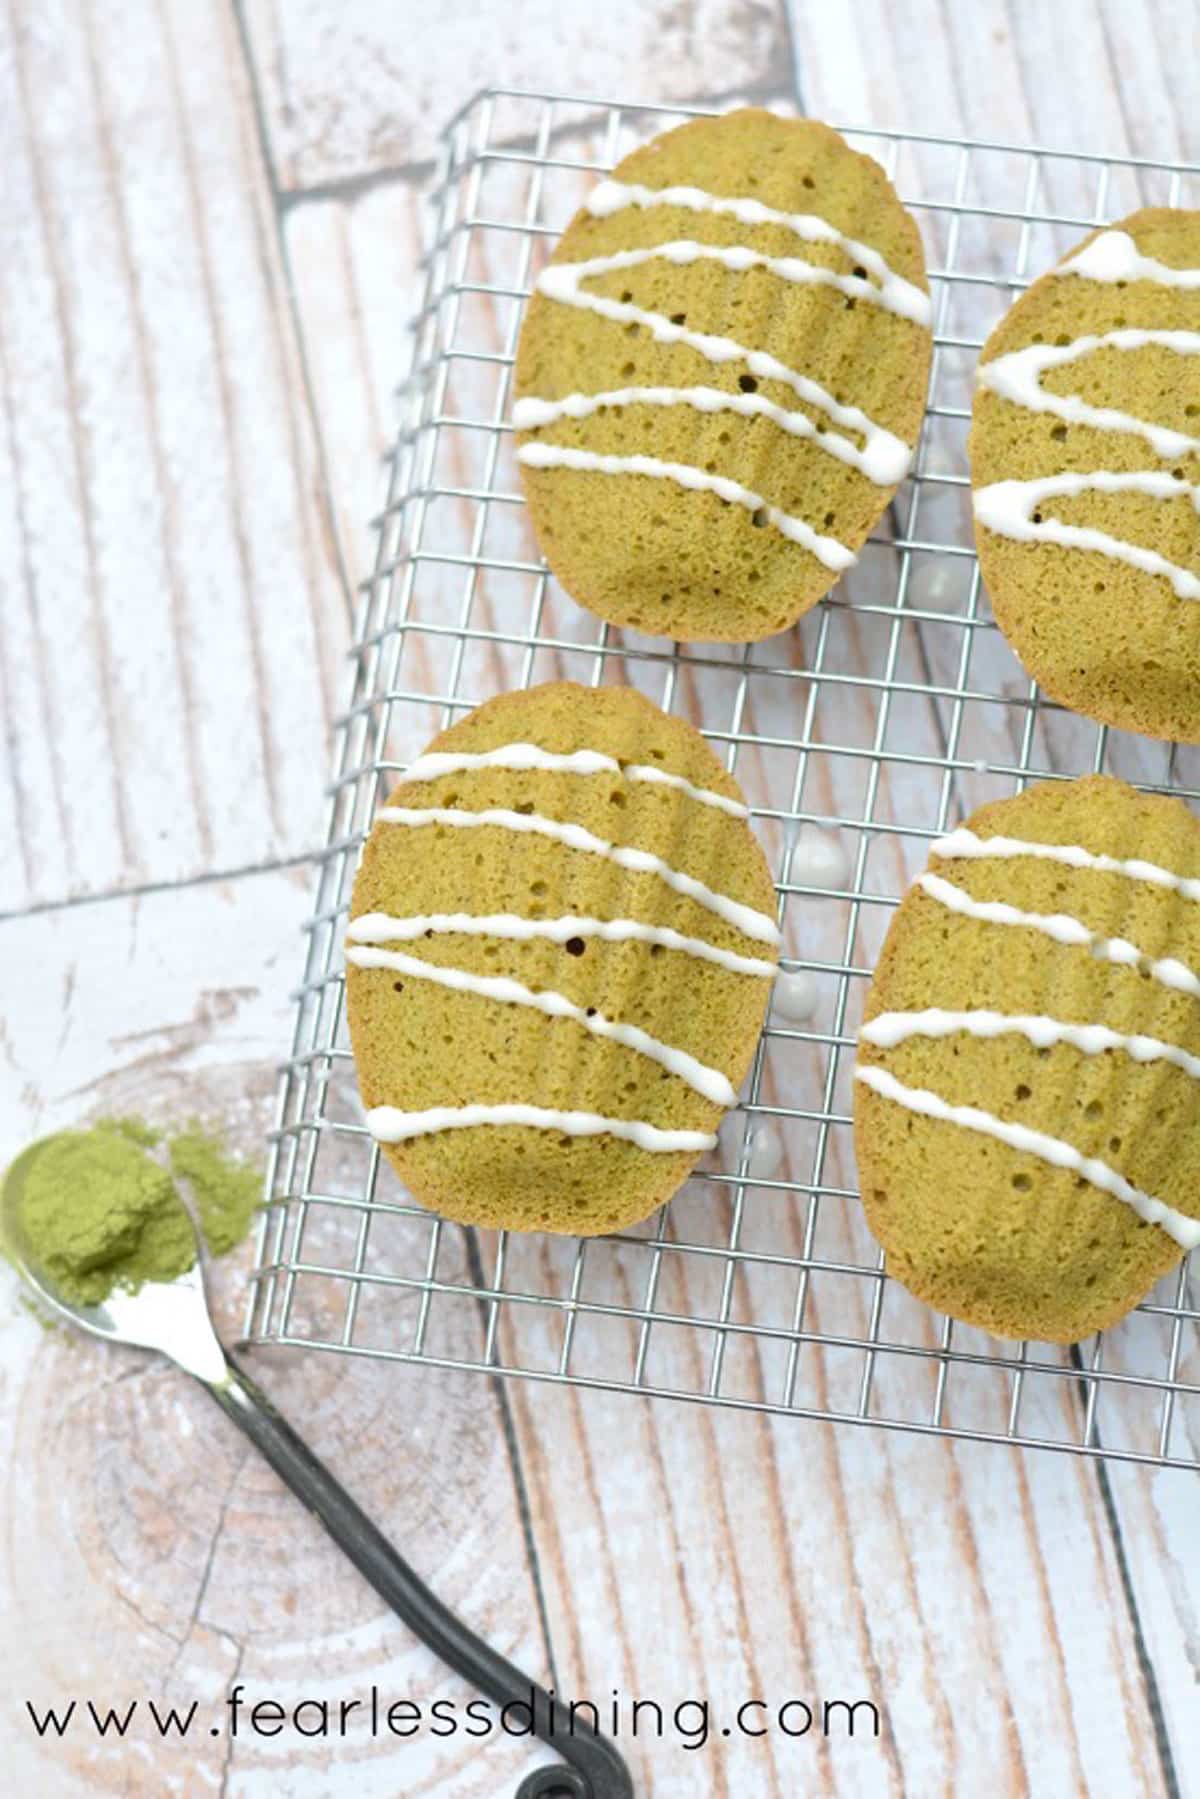 Gluten-free matcha madeleines on a wire rack. Each has icing drizzled on top.